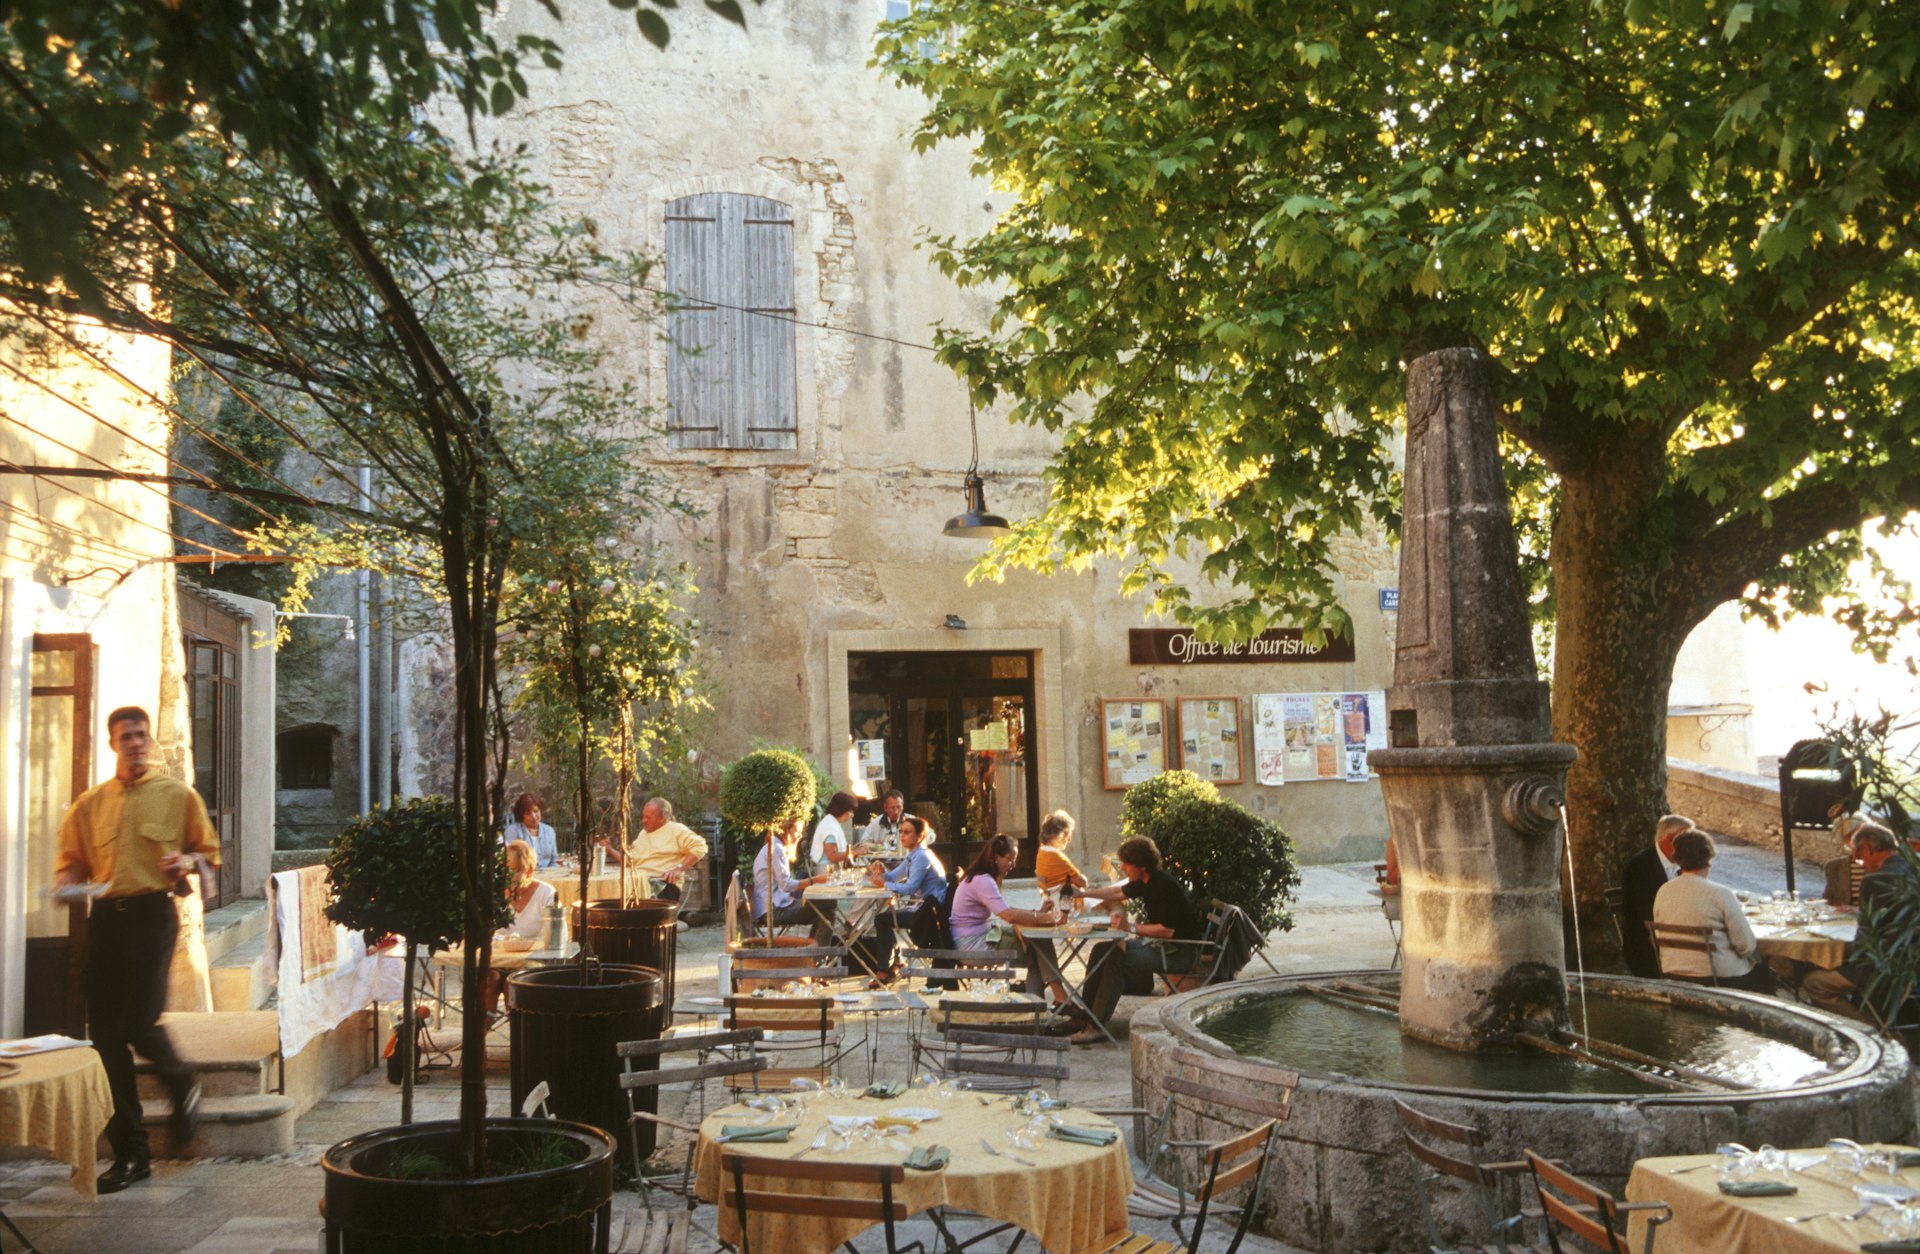 People relaxing on a restaurant terrace in a village in France